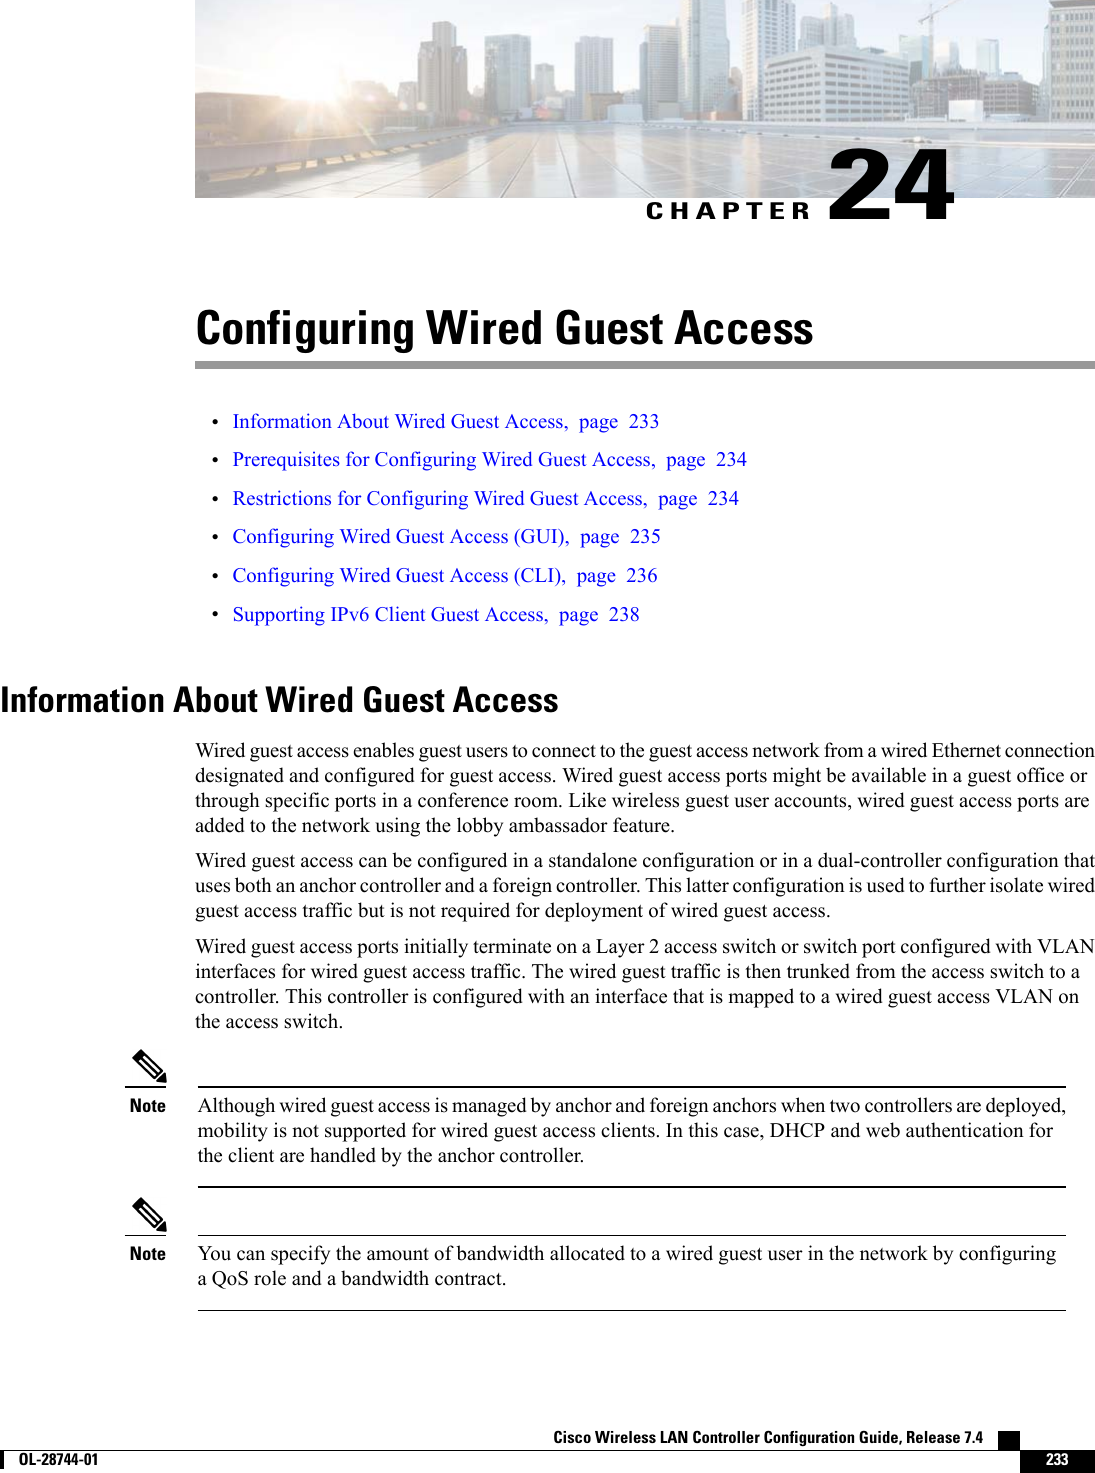 CHAPTER 24Configuring Wired Guest Access•Information About Wired Guest Access, page 233•Prerequisites for Configuring Wired Guest Access, page 234•Restrictions for Configuring Wired Guest Access, page 234•Configuring Wired Guest Access (GUI), page 235•Configuring Wired Guest Access (CLI), page 236•Supporting IPv6 Client Guest Access, page 238Information About Wired Guest AccessWired guest access enables guest users to connect to the guest access network from a wired Ethernet connectiondesignated and configured for guest access. Wired guest access ports might be available in a guest office orthrough specific ports in a conference room. Like wireless guest user accounts, wired guest access ports areadded to the network using the lobby ambassador feature.Wired guest access can be configured in a standalone configuration or in a dual-controller configuration thatuses both an anchor controller and a foreign controller. This latter configuration is used to further isolate wiredguest access traffic but is not required for deployment of wired guest access.Wired guest access ports initially terminate on a Layer 2 access switch or switch port configured with VLANinterfaces for wired guest access traffic. The wired guest traffic is then trunked from the access switch to acontroller. This controller is configured with an interface that is mapped to a wired guest access VLAN onthe access switch.Although wired guest access is managed by anchor and foreign anchors when two controllers are deployed,mobility is not supported for wired guest access clients. In this case, DHCP and web authentication forthe client are handled by the anchor controller.NoteYou can specify the amount of bandwidth allocated to a wired guest user in the network by configuringa QoS role and a bandwidth contract.NoteCisco Wireless LAN Controller Configuration Guide, Release 7.4        OL-28744-01 233